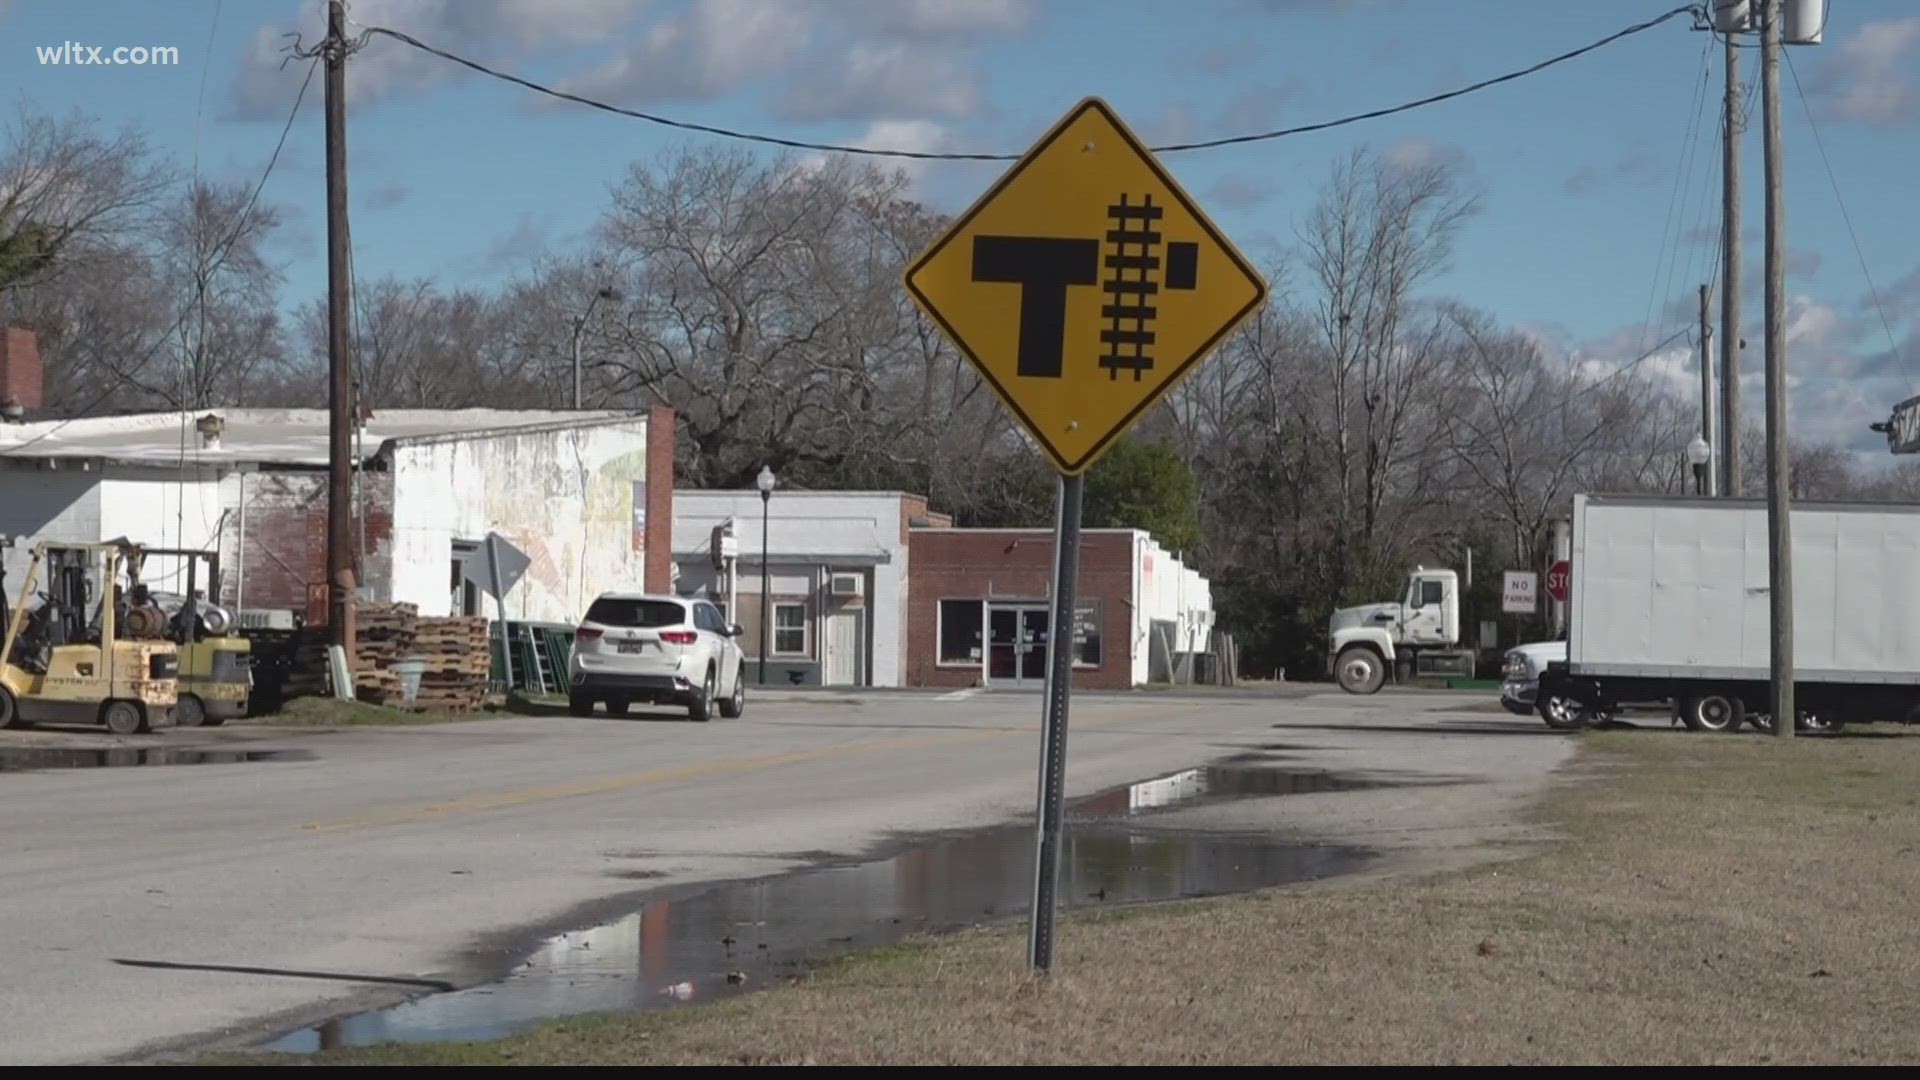 The town of Bethune has allocated American Rescue Plan Act money to help with revitalization.